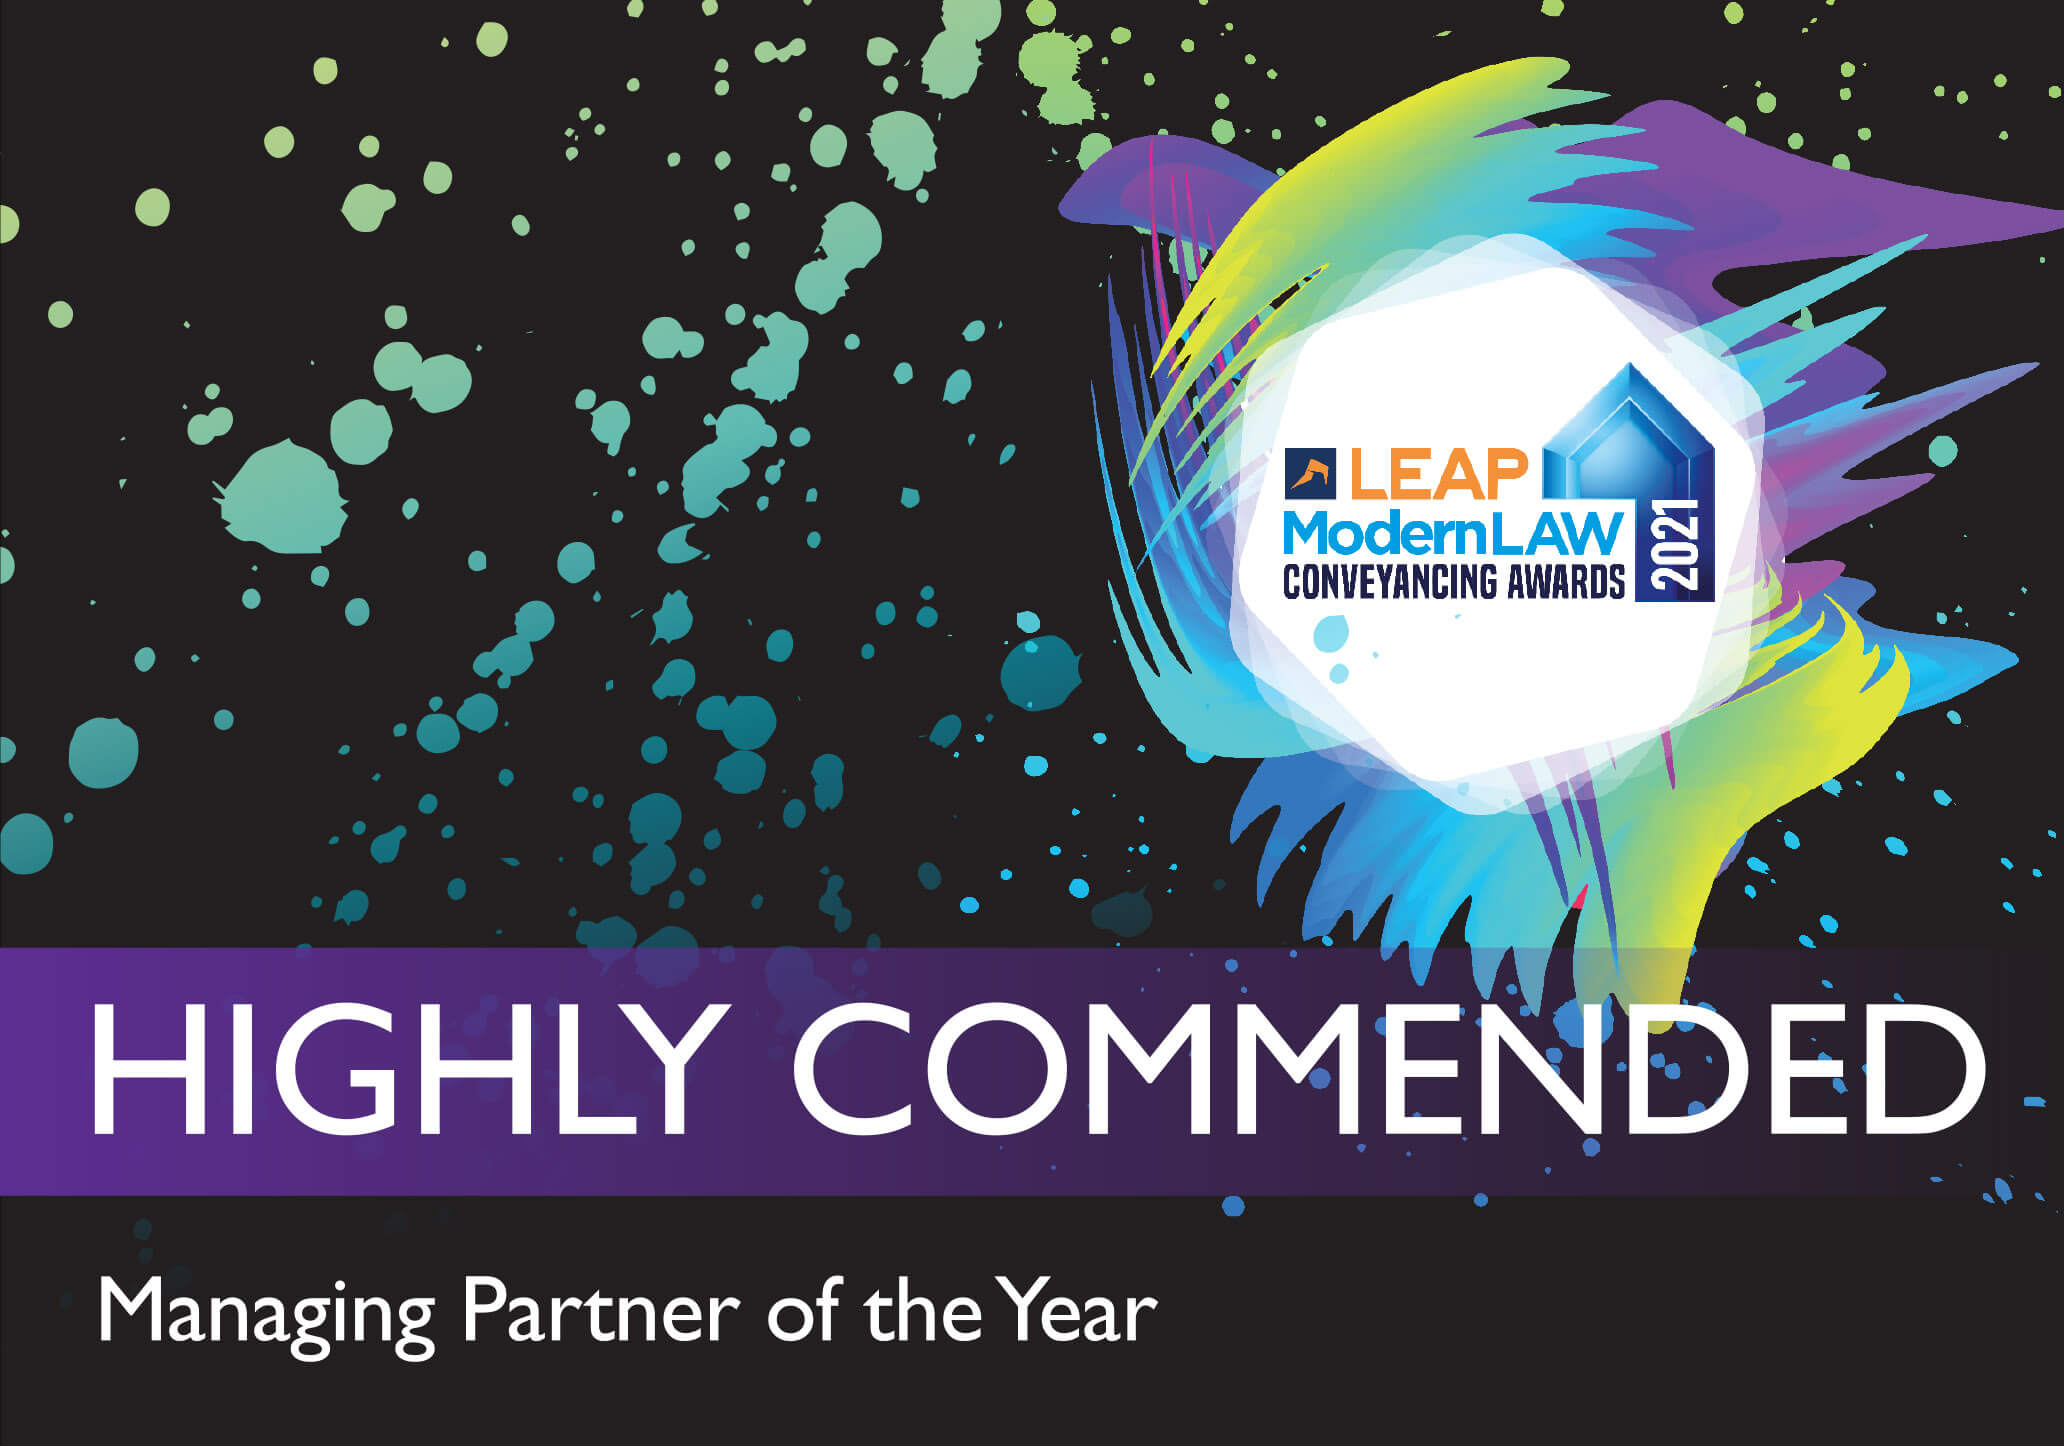 LEAP Modern Law Conveyancing Awards 2021